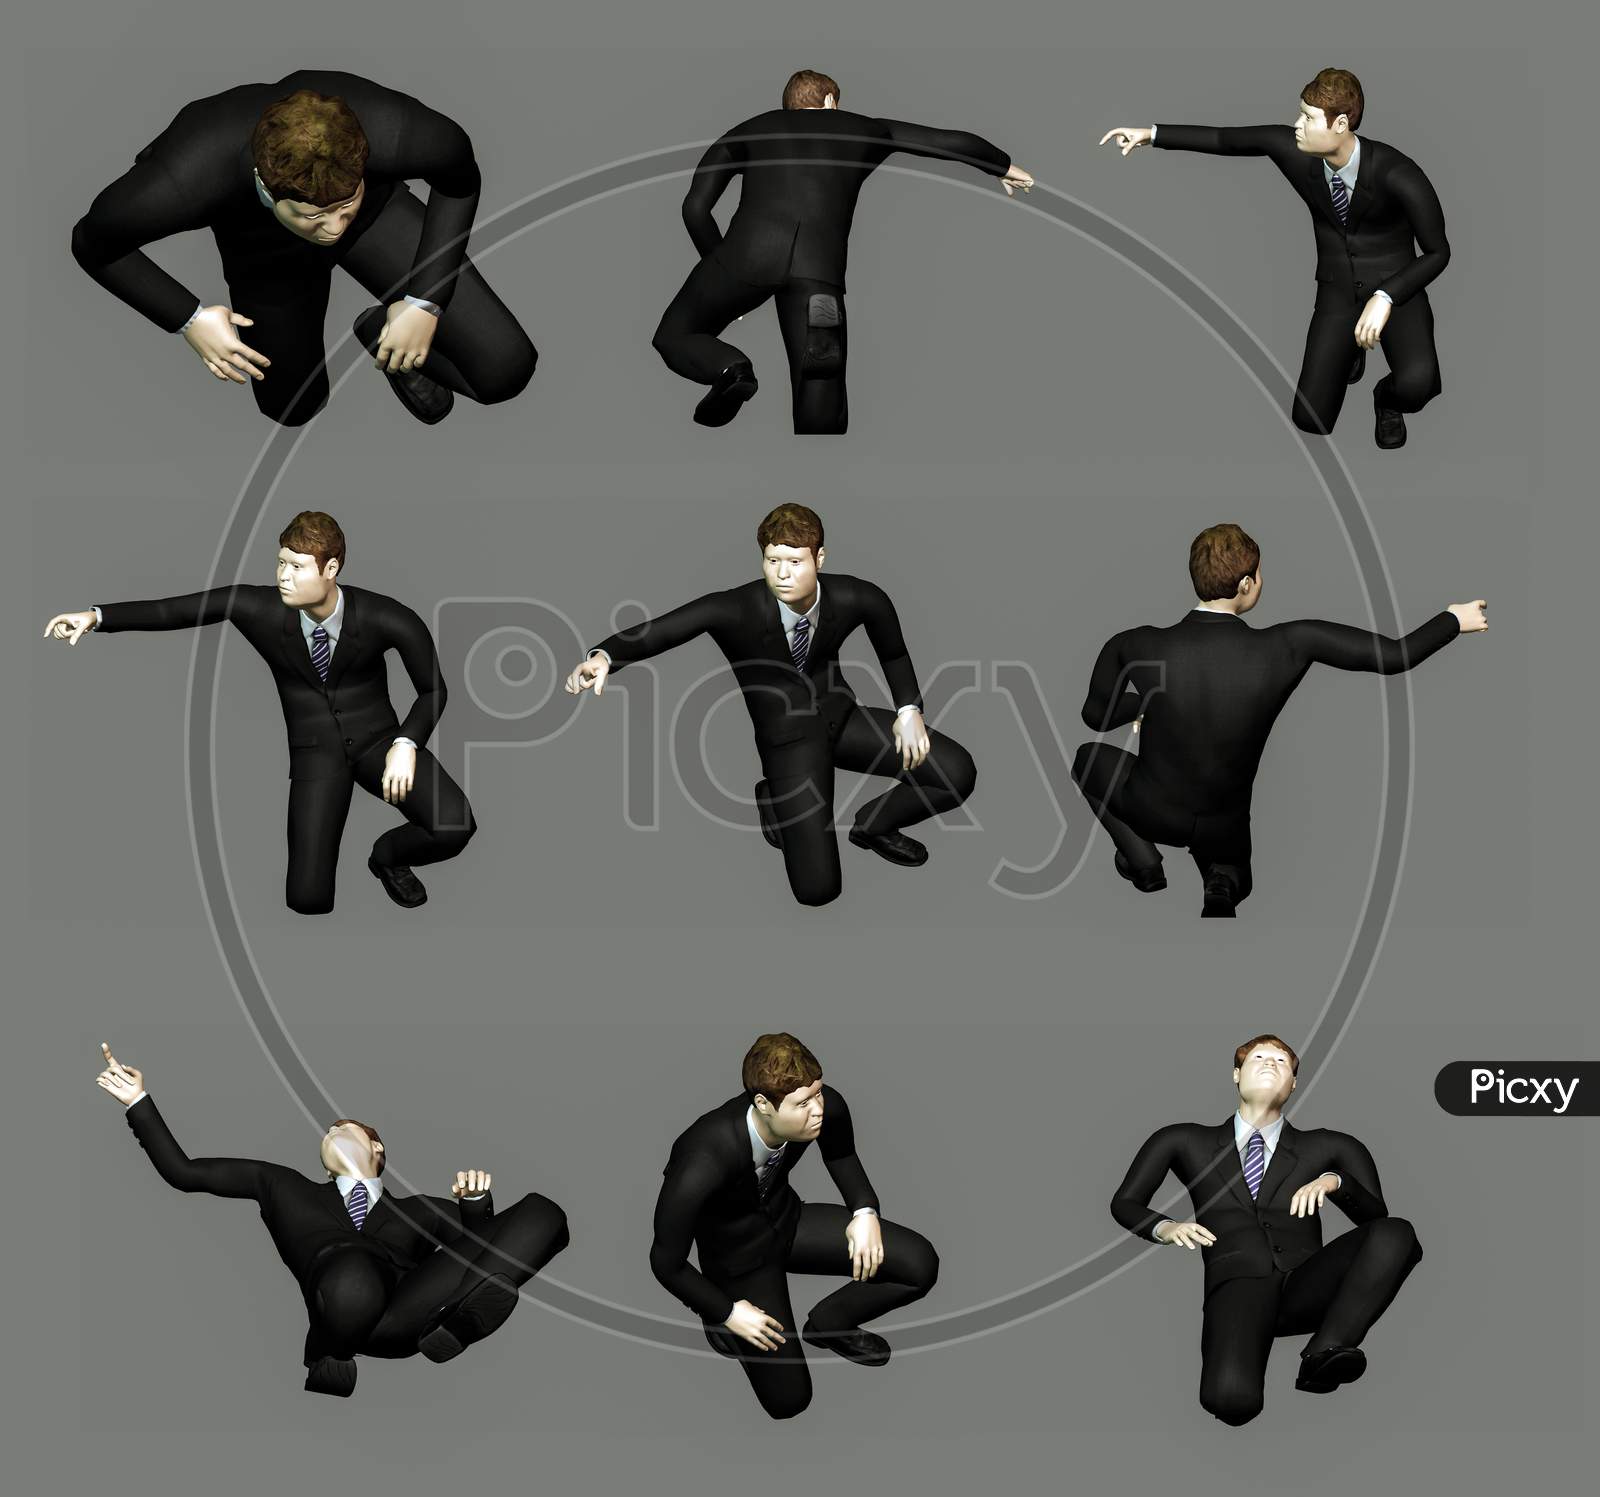 3D Model Set Sitting Business Man From Different Angles For Vfx, Animation Movie And Video Game Projects